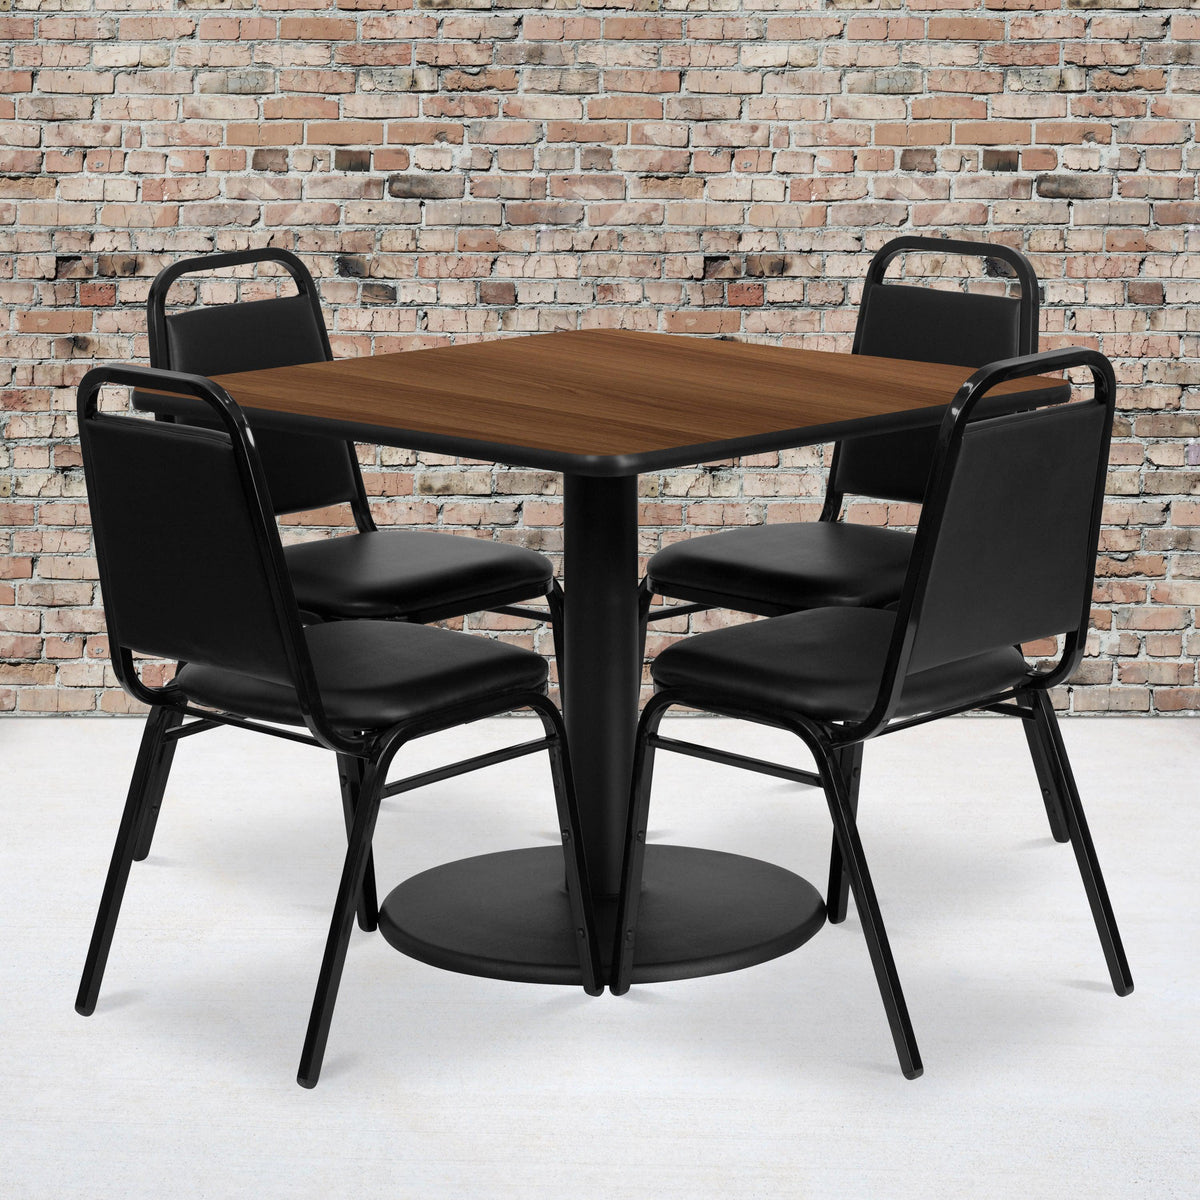 Walnut Top/Black Vinyl Seat |#| 36inch Square Walnut Laminate Table with Round Base and 4 Black Banquet Chairs